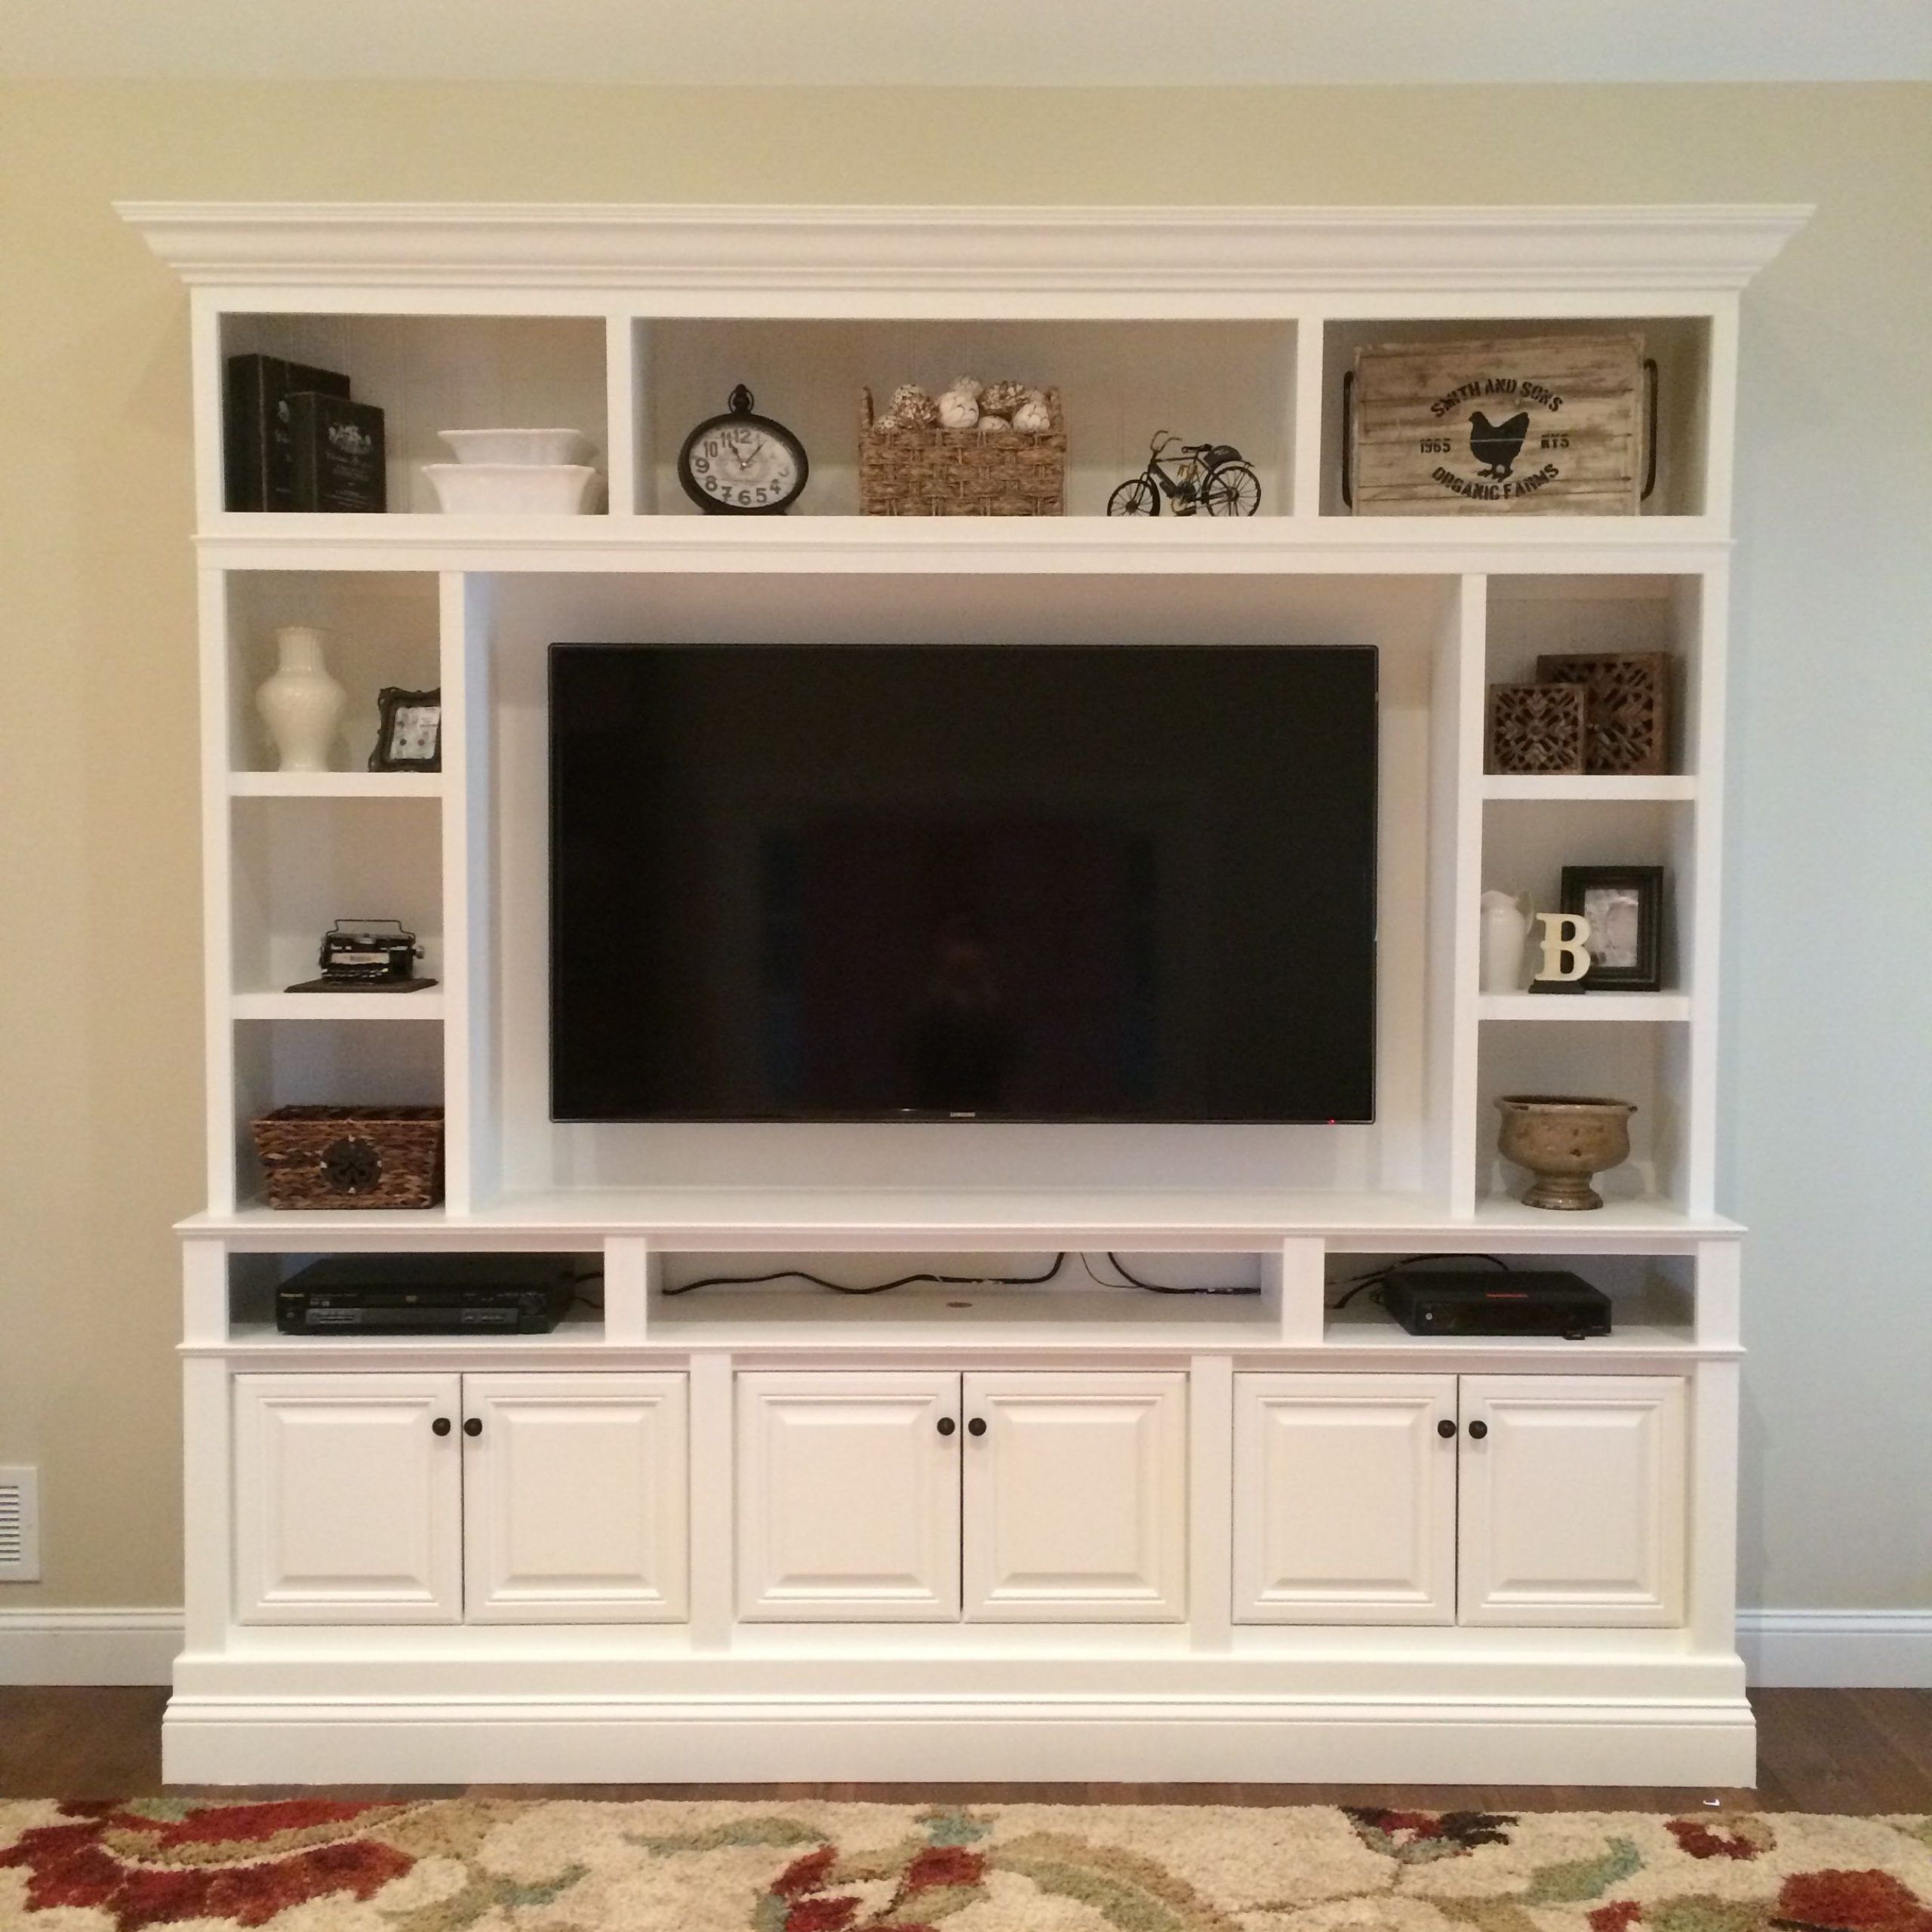 Diy Built In Tv Cabinet – Axis Decoration Ideas Inside Entertainment Center With Storage Cabinet (View 17 of 20)